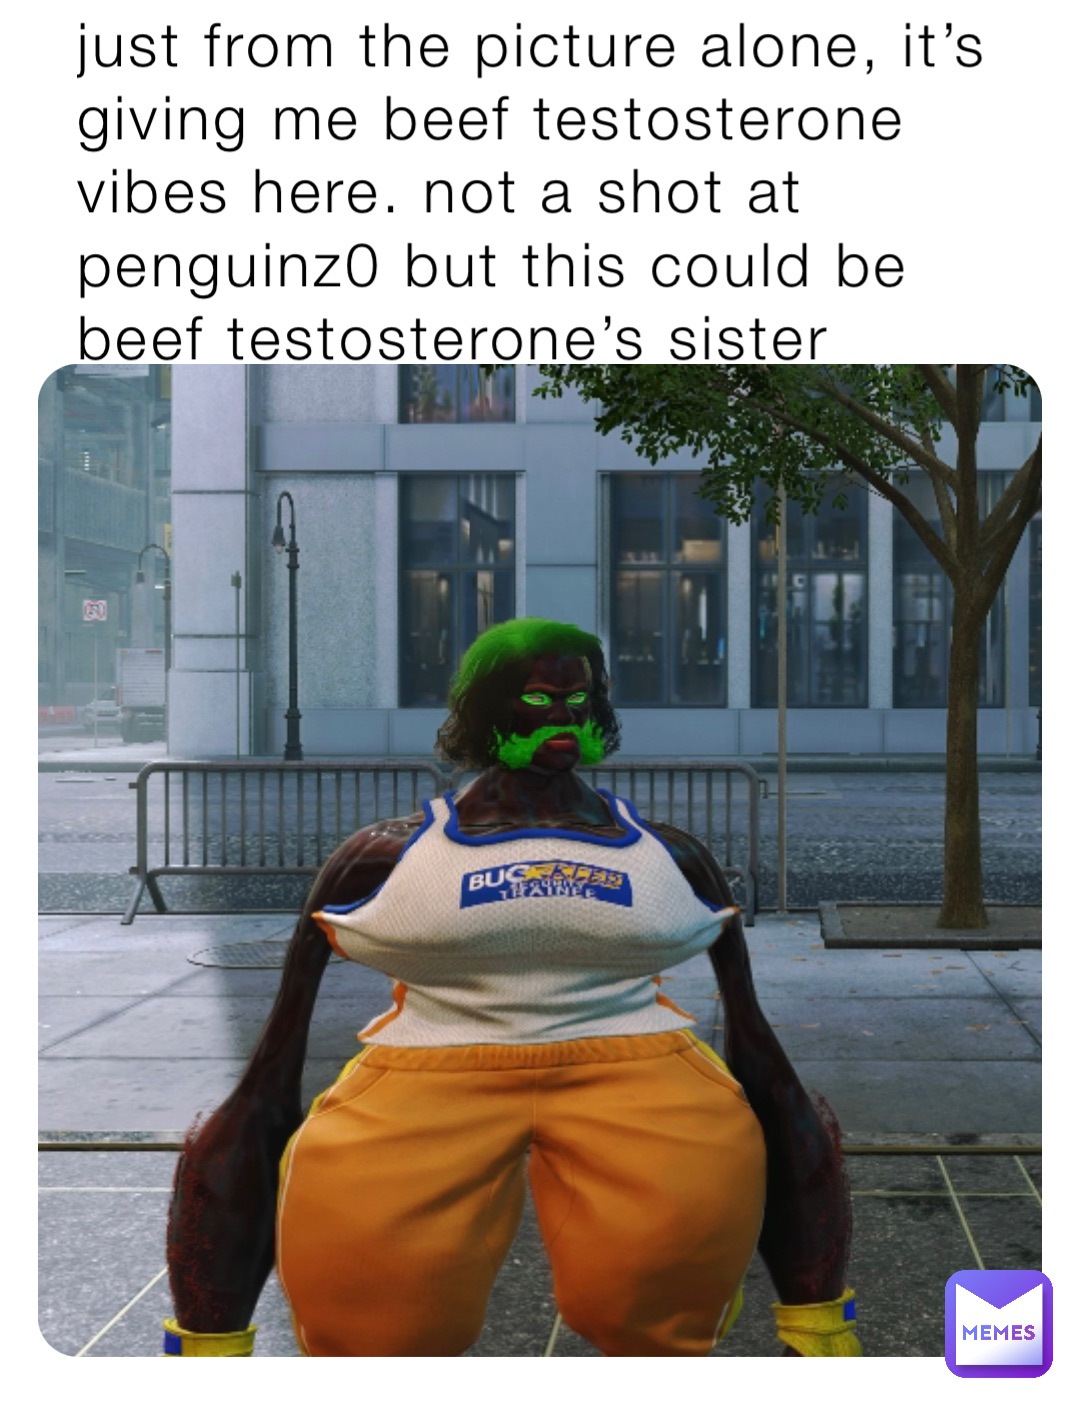 just from the picture alone, it’s giving me beef testosterone vibes here. not a shot at penguinz0 but this could be beef testosterone’s sister